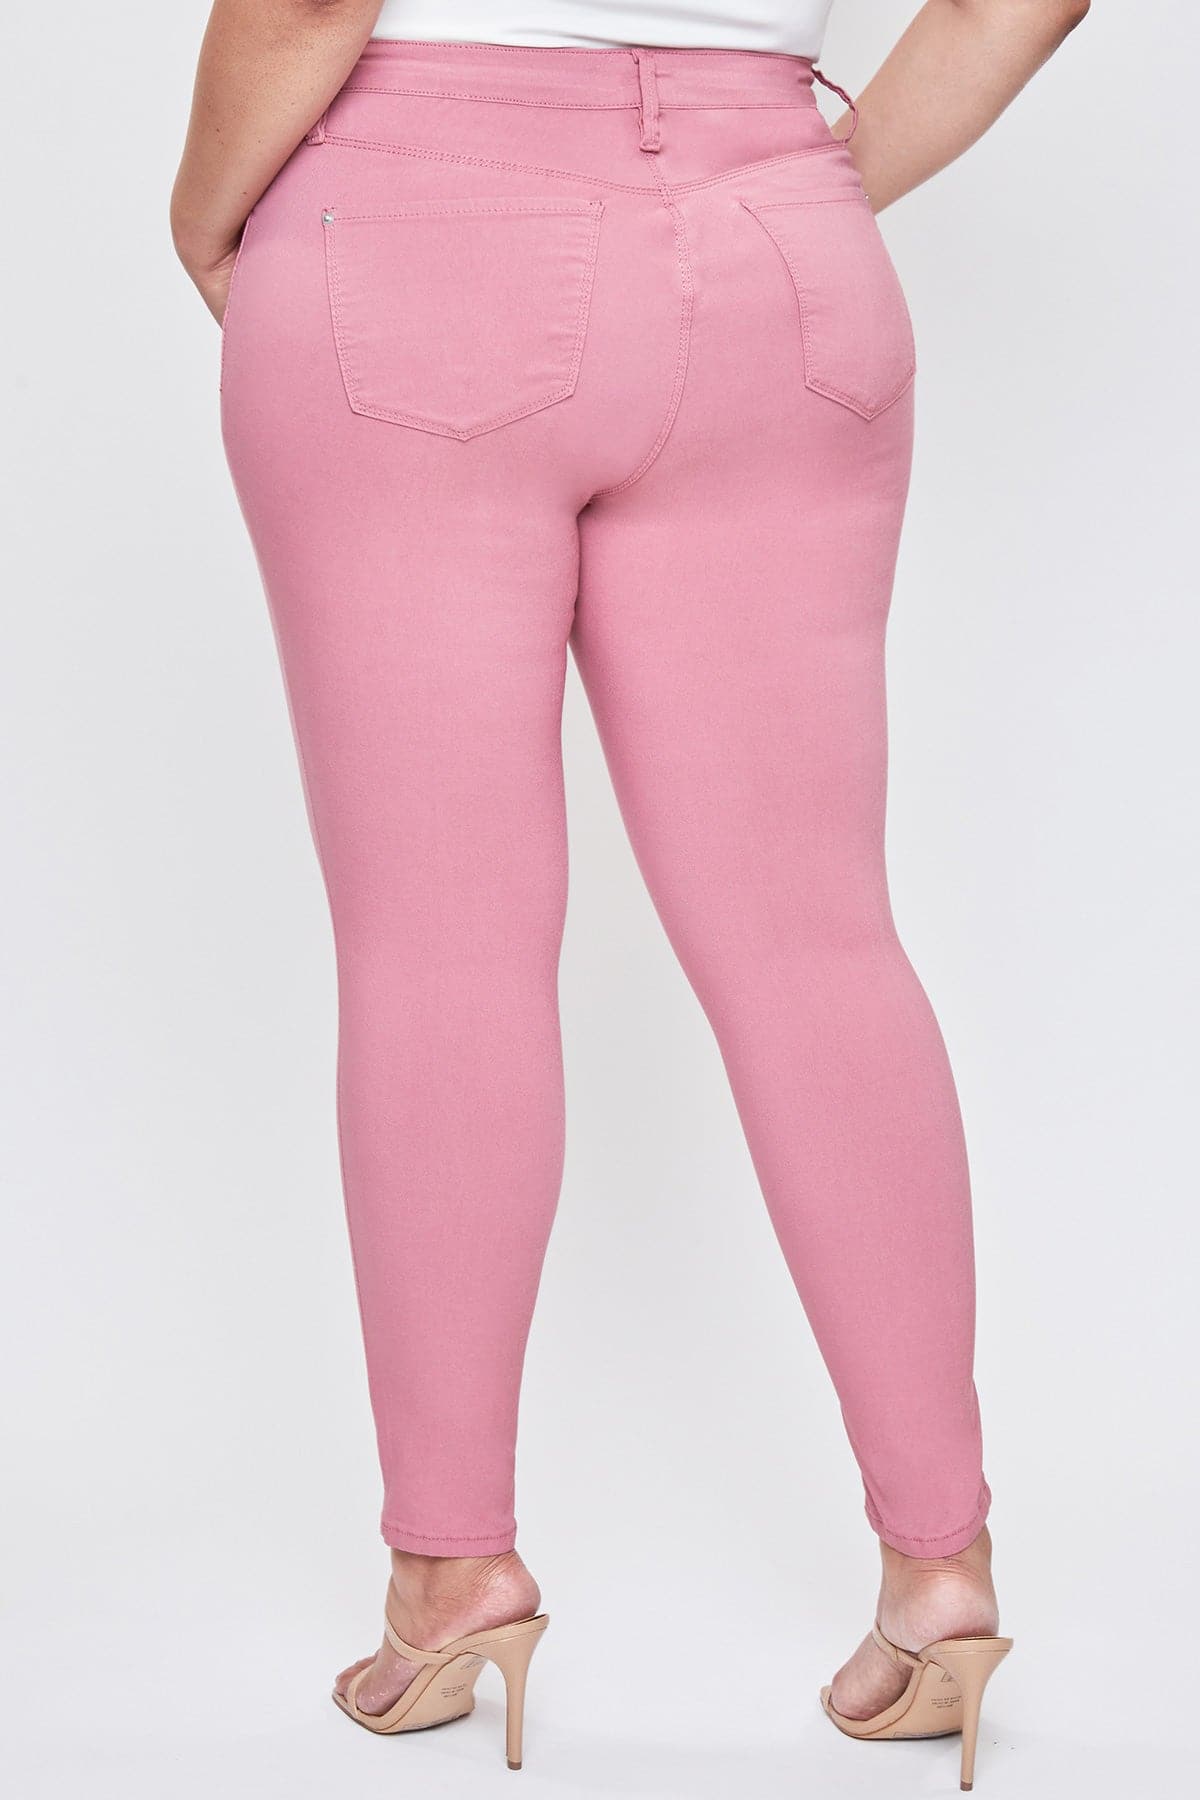 Women's Plus Size Hyperstretch Forever Color Pants - Pastels